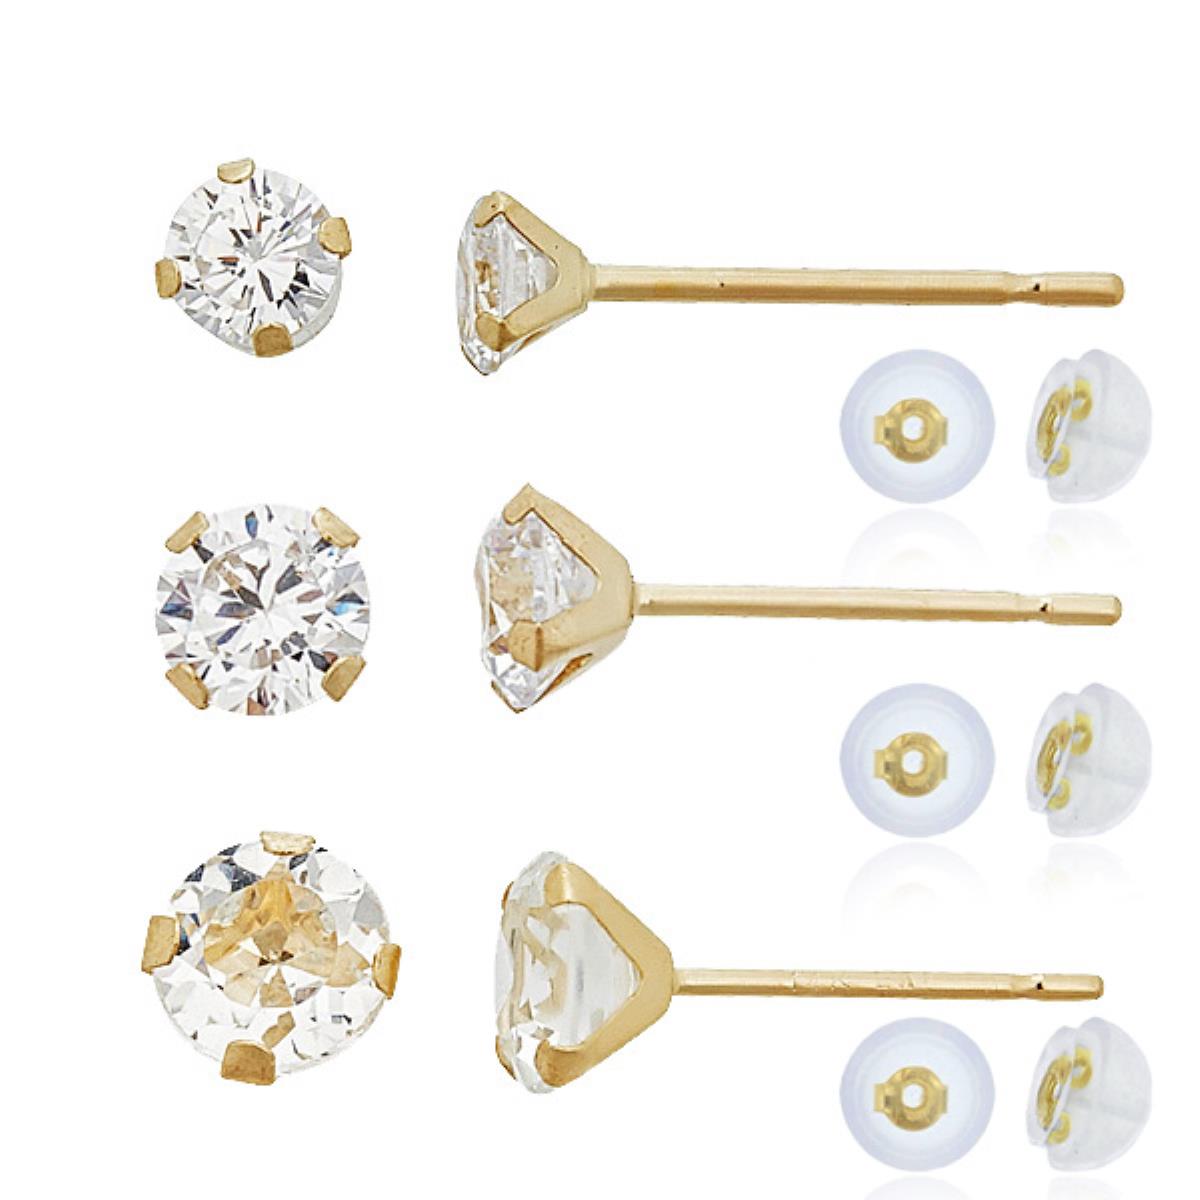 14K Yellow Gold 3/4/5mm Martini Round Cut Solitaire Stud Earring Set